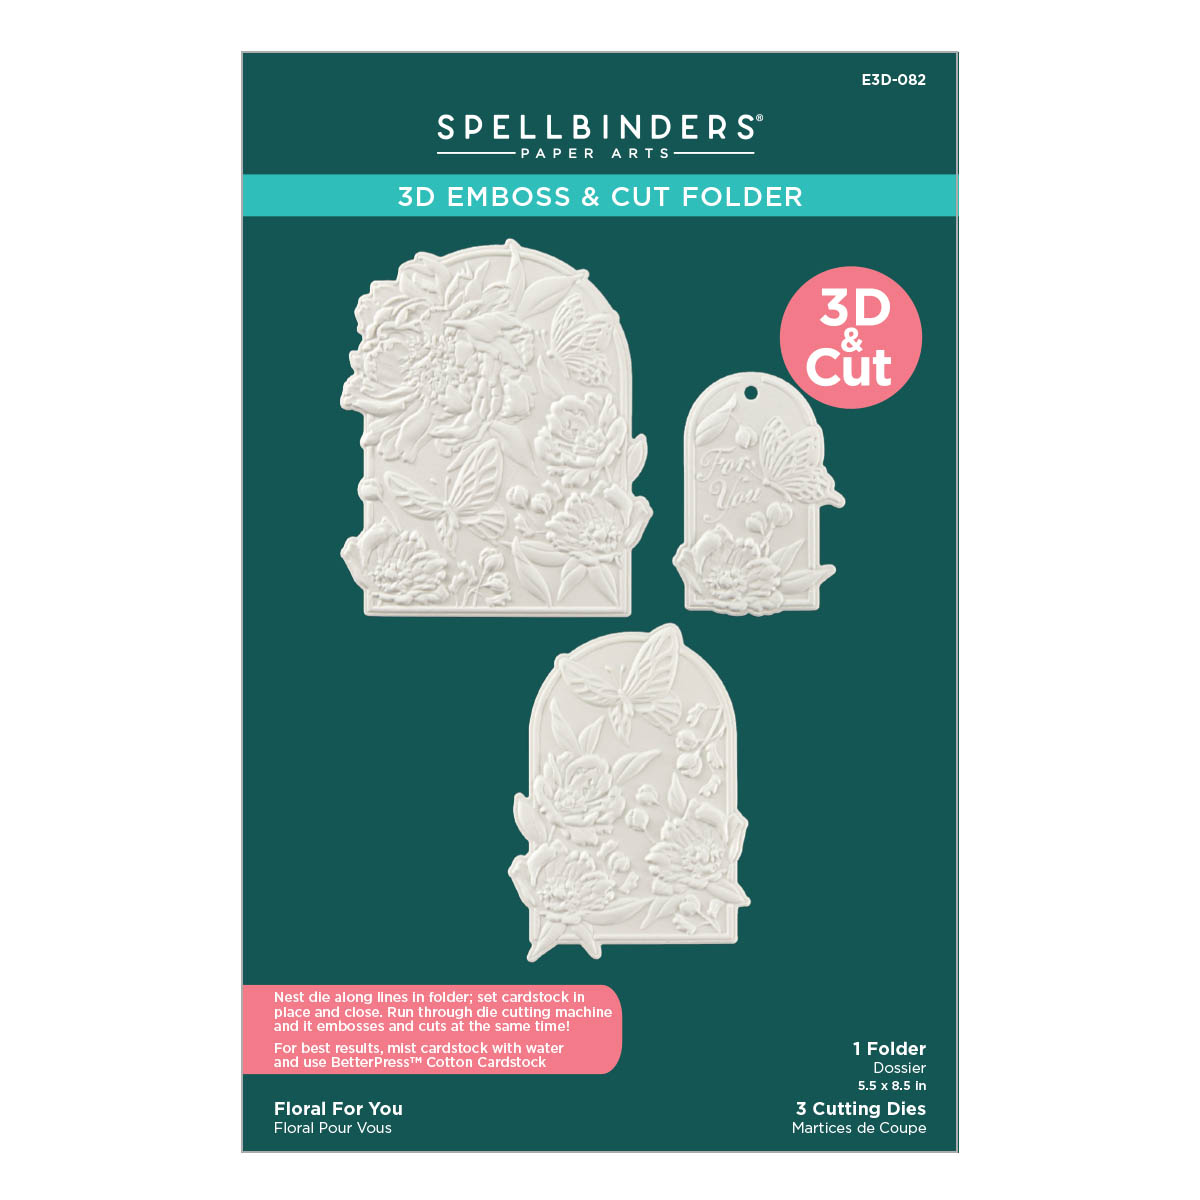 Spellbinders Floral For You 3D Emboss & Cut Folder From the Sealed 3D Botanicals Collection